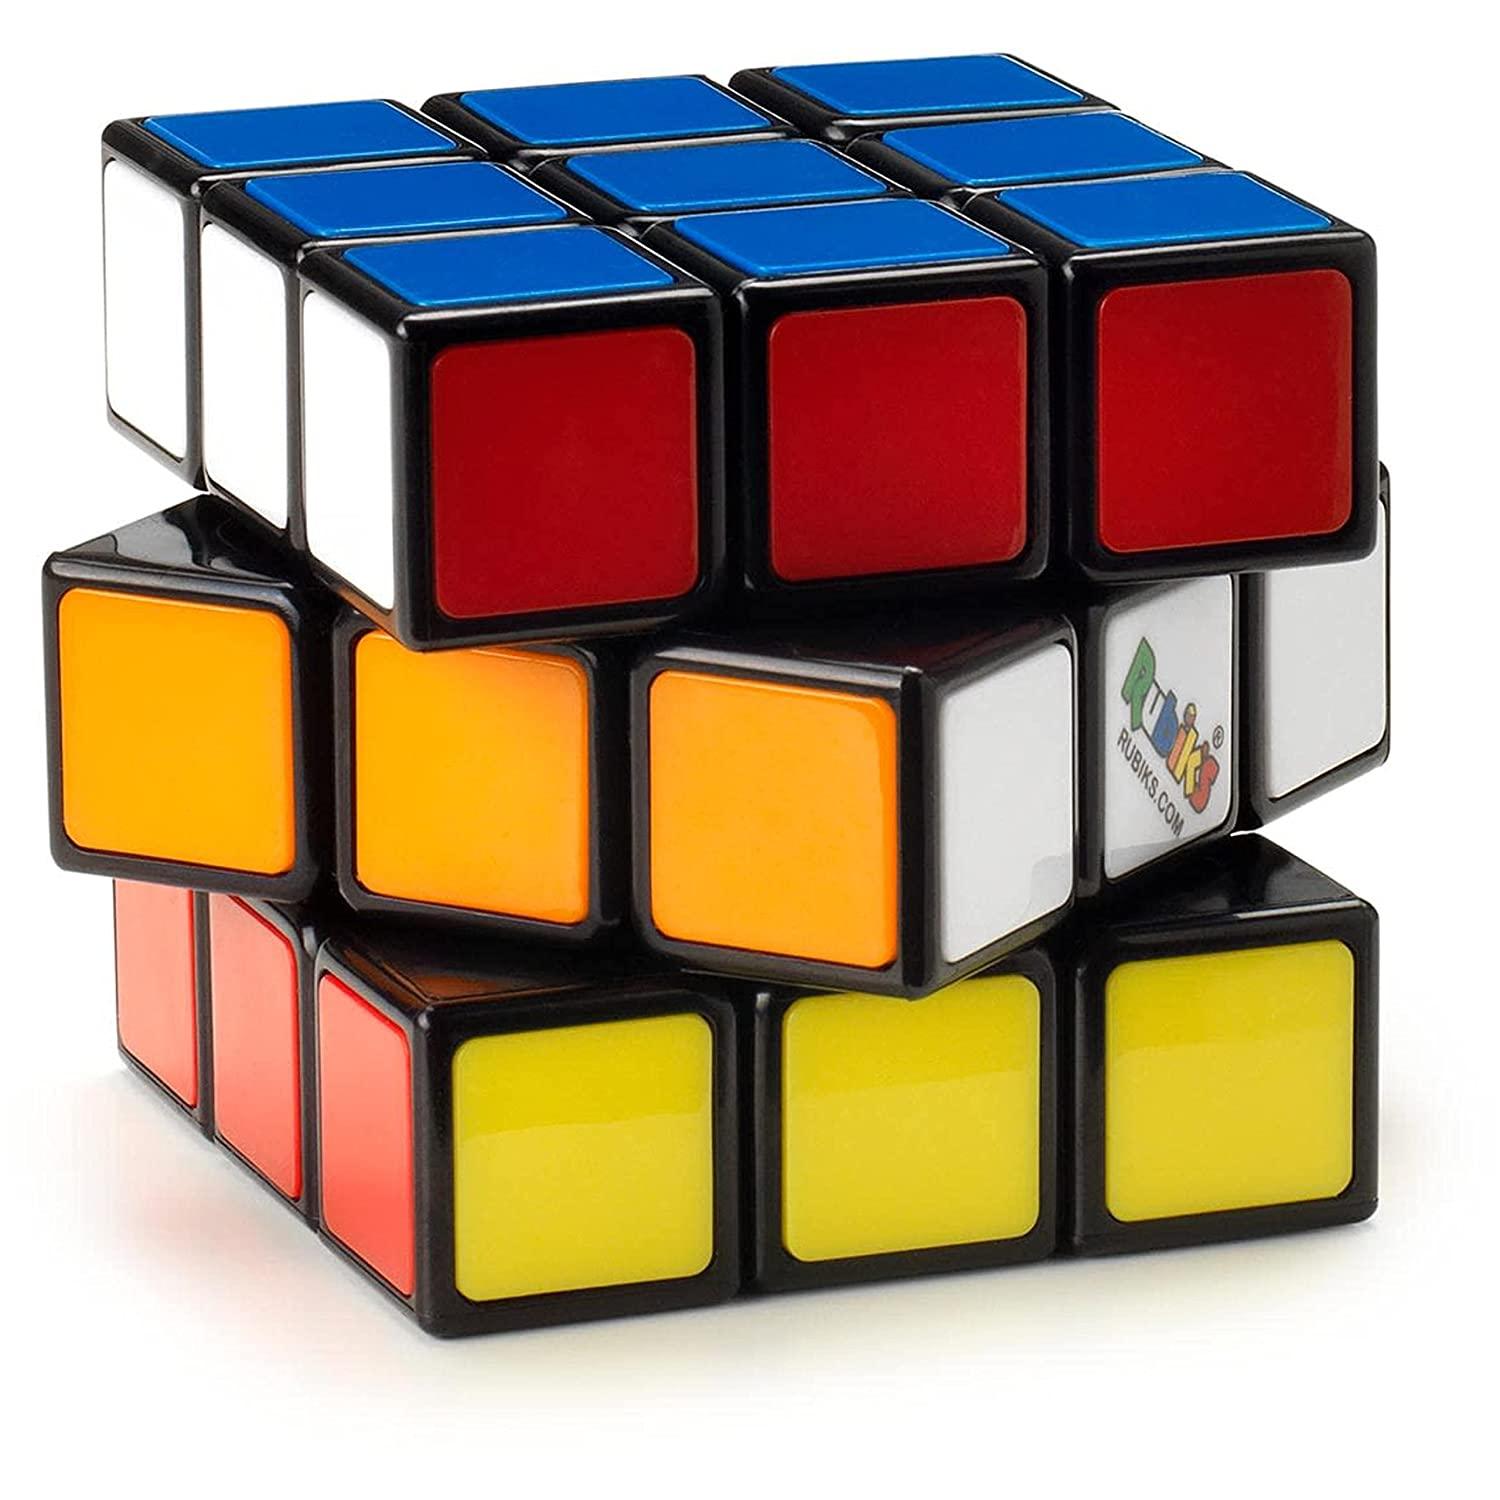 Funskool Rubik’s Cube - The Original 3x3 Colour-Matching Puzzle for Ages 8+ - FunCorp India